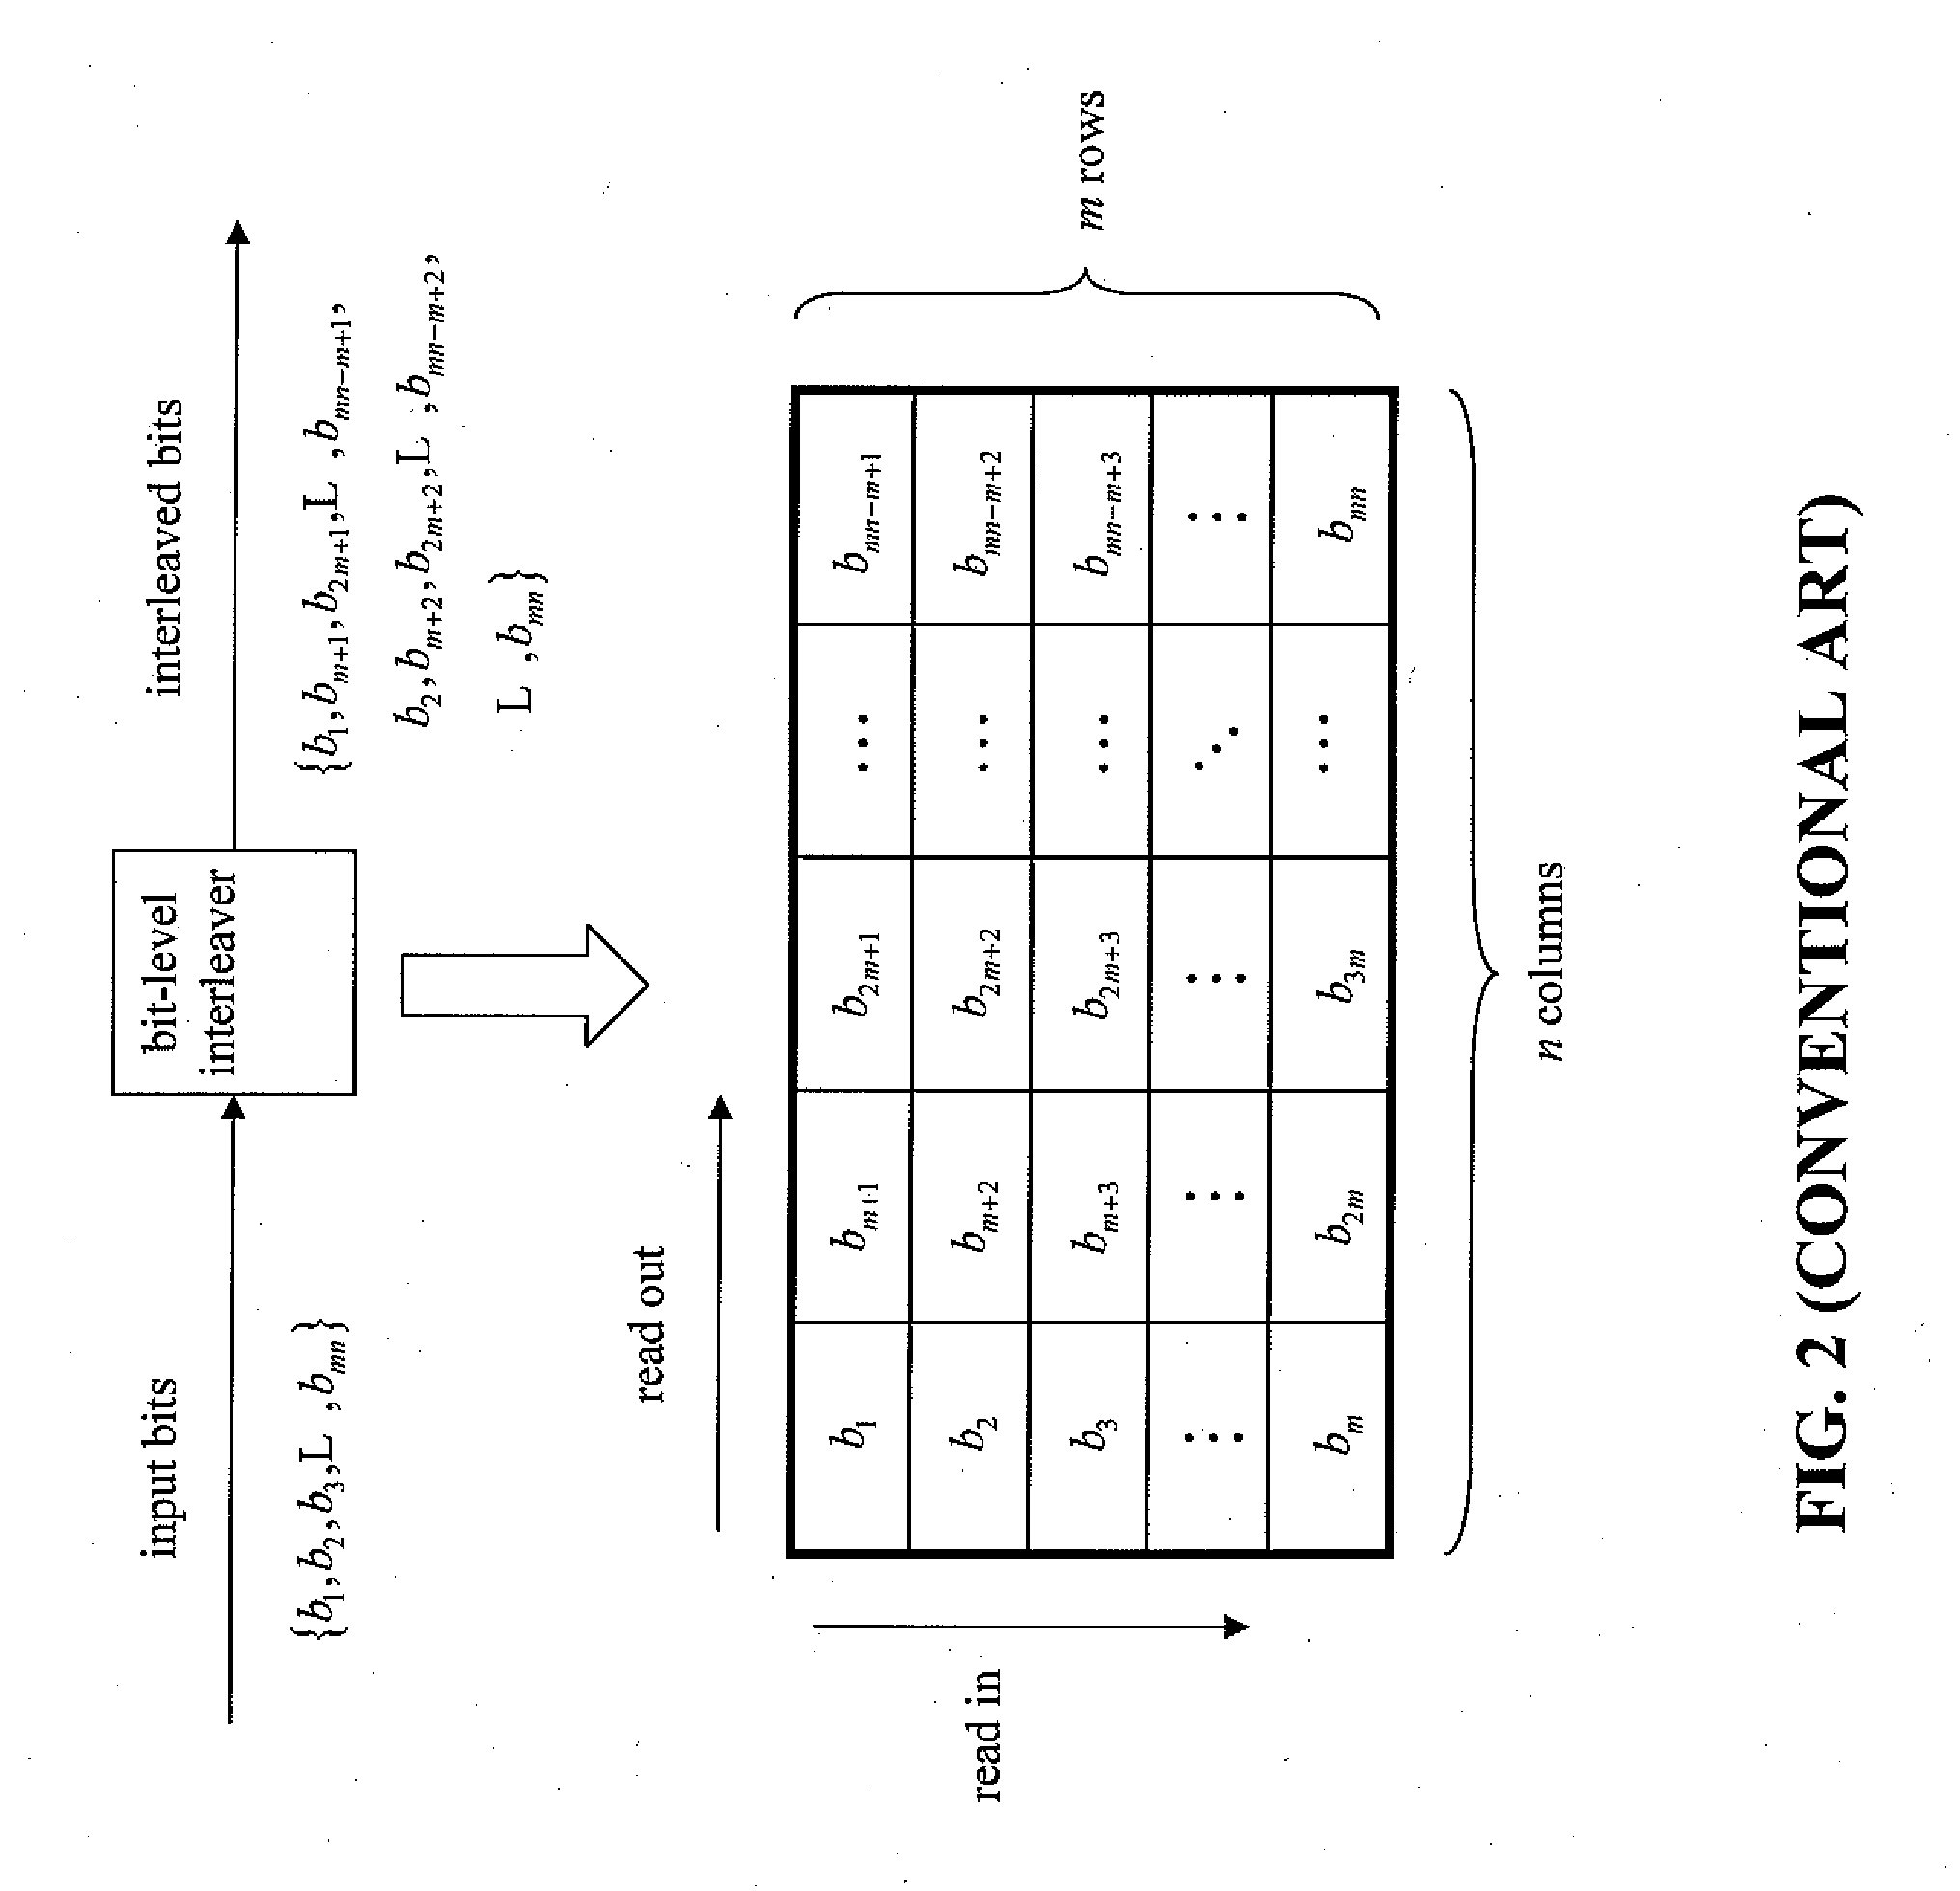 Tone-Interleaved Coded Modulation Scheme for MIMO OFDM Communication